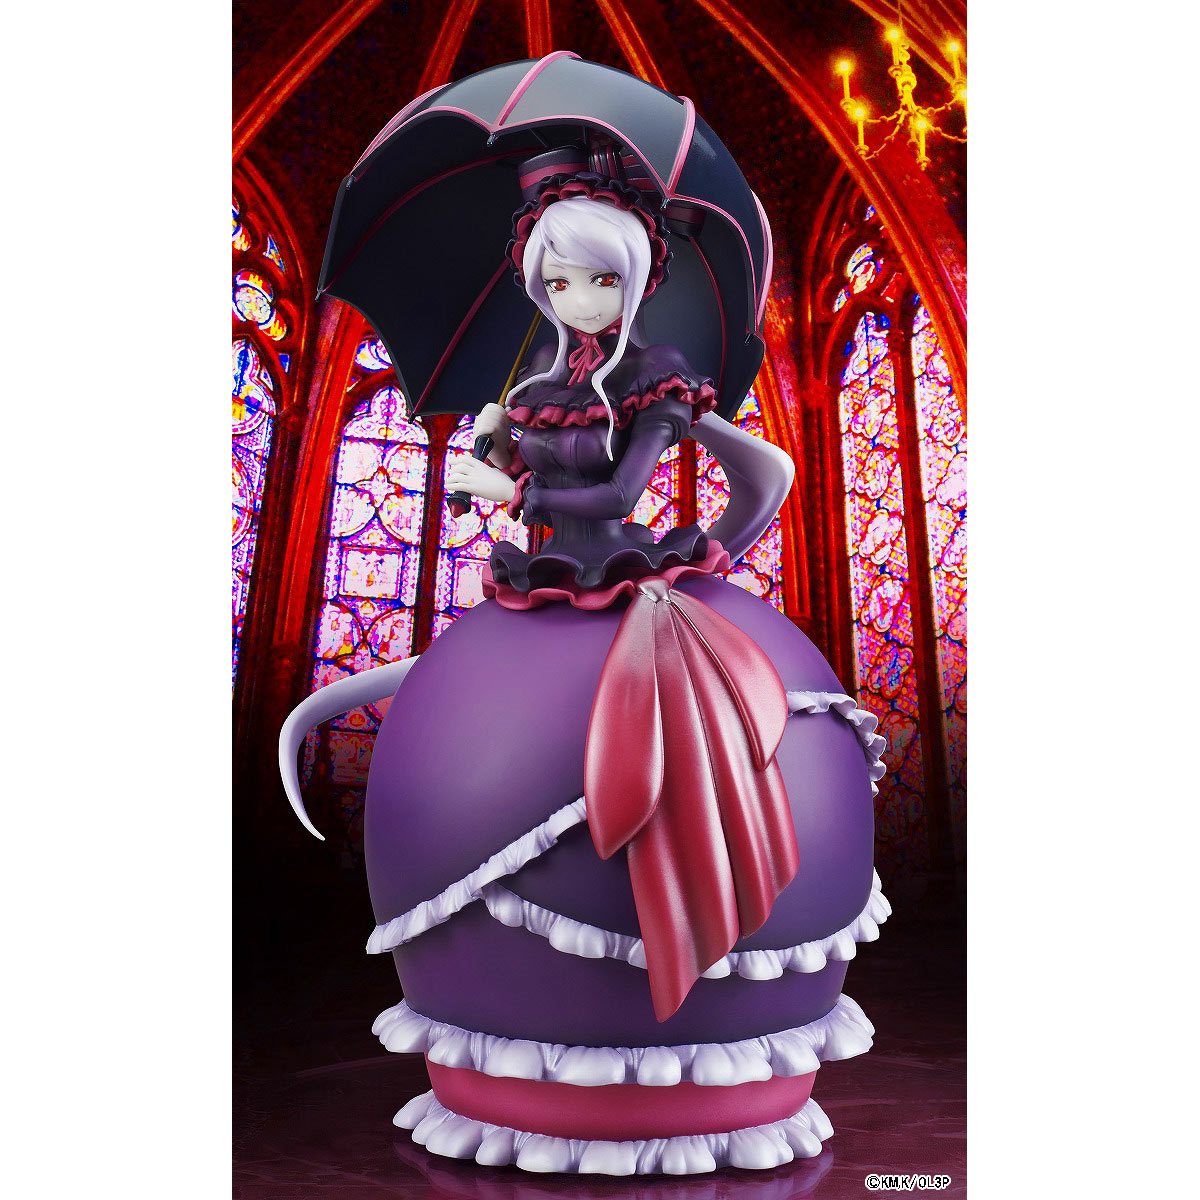 Overlord IV Shalltear Bride Version 1:7 Scale Statue